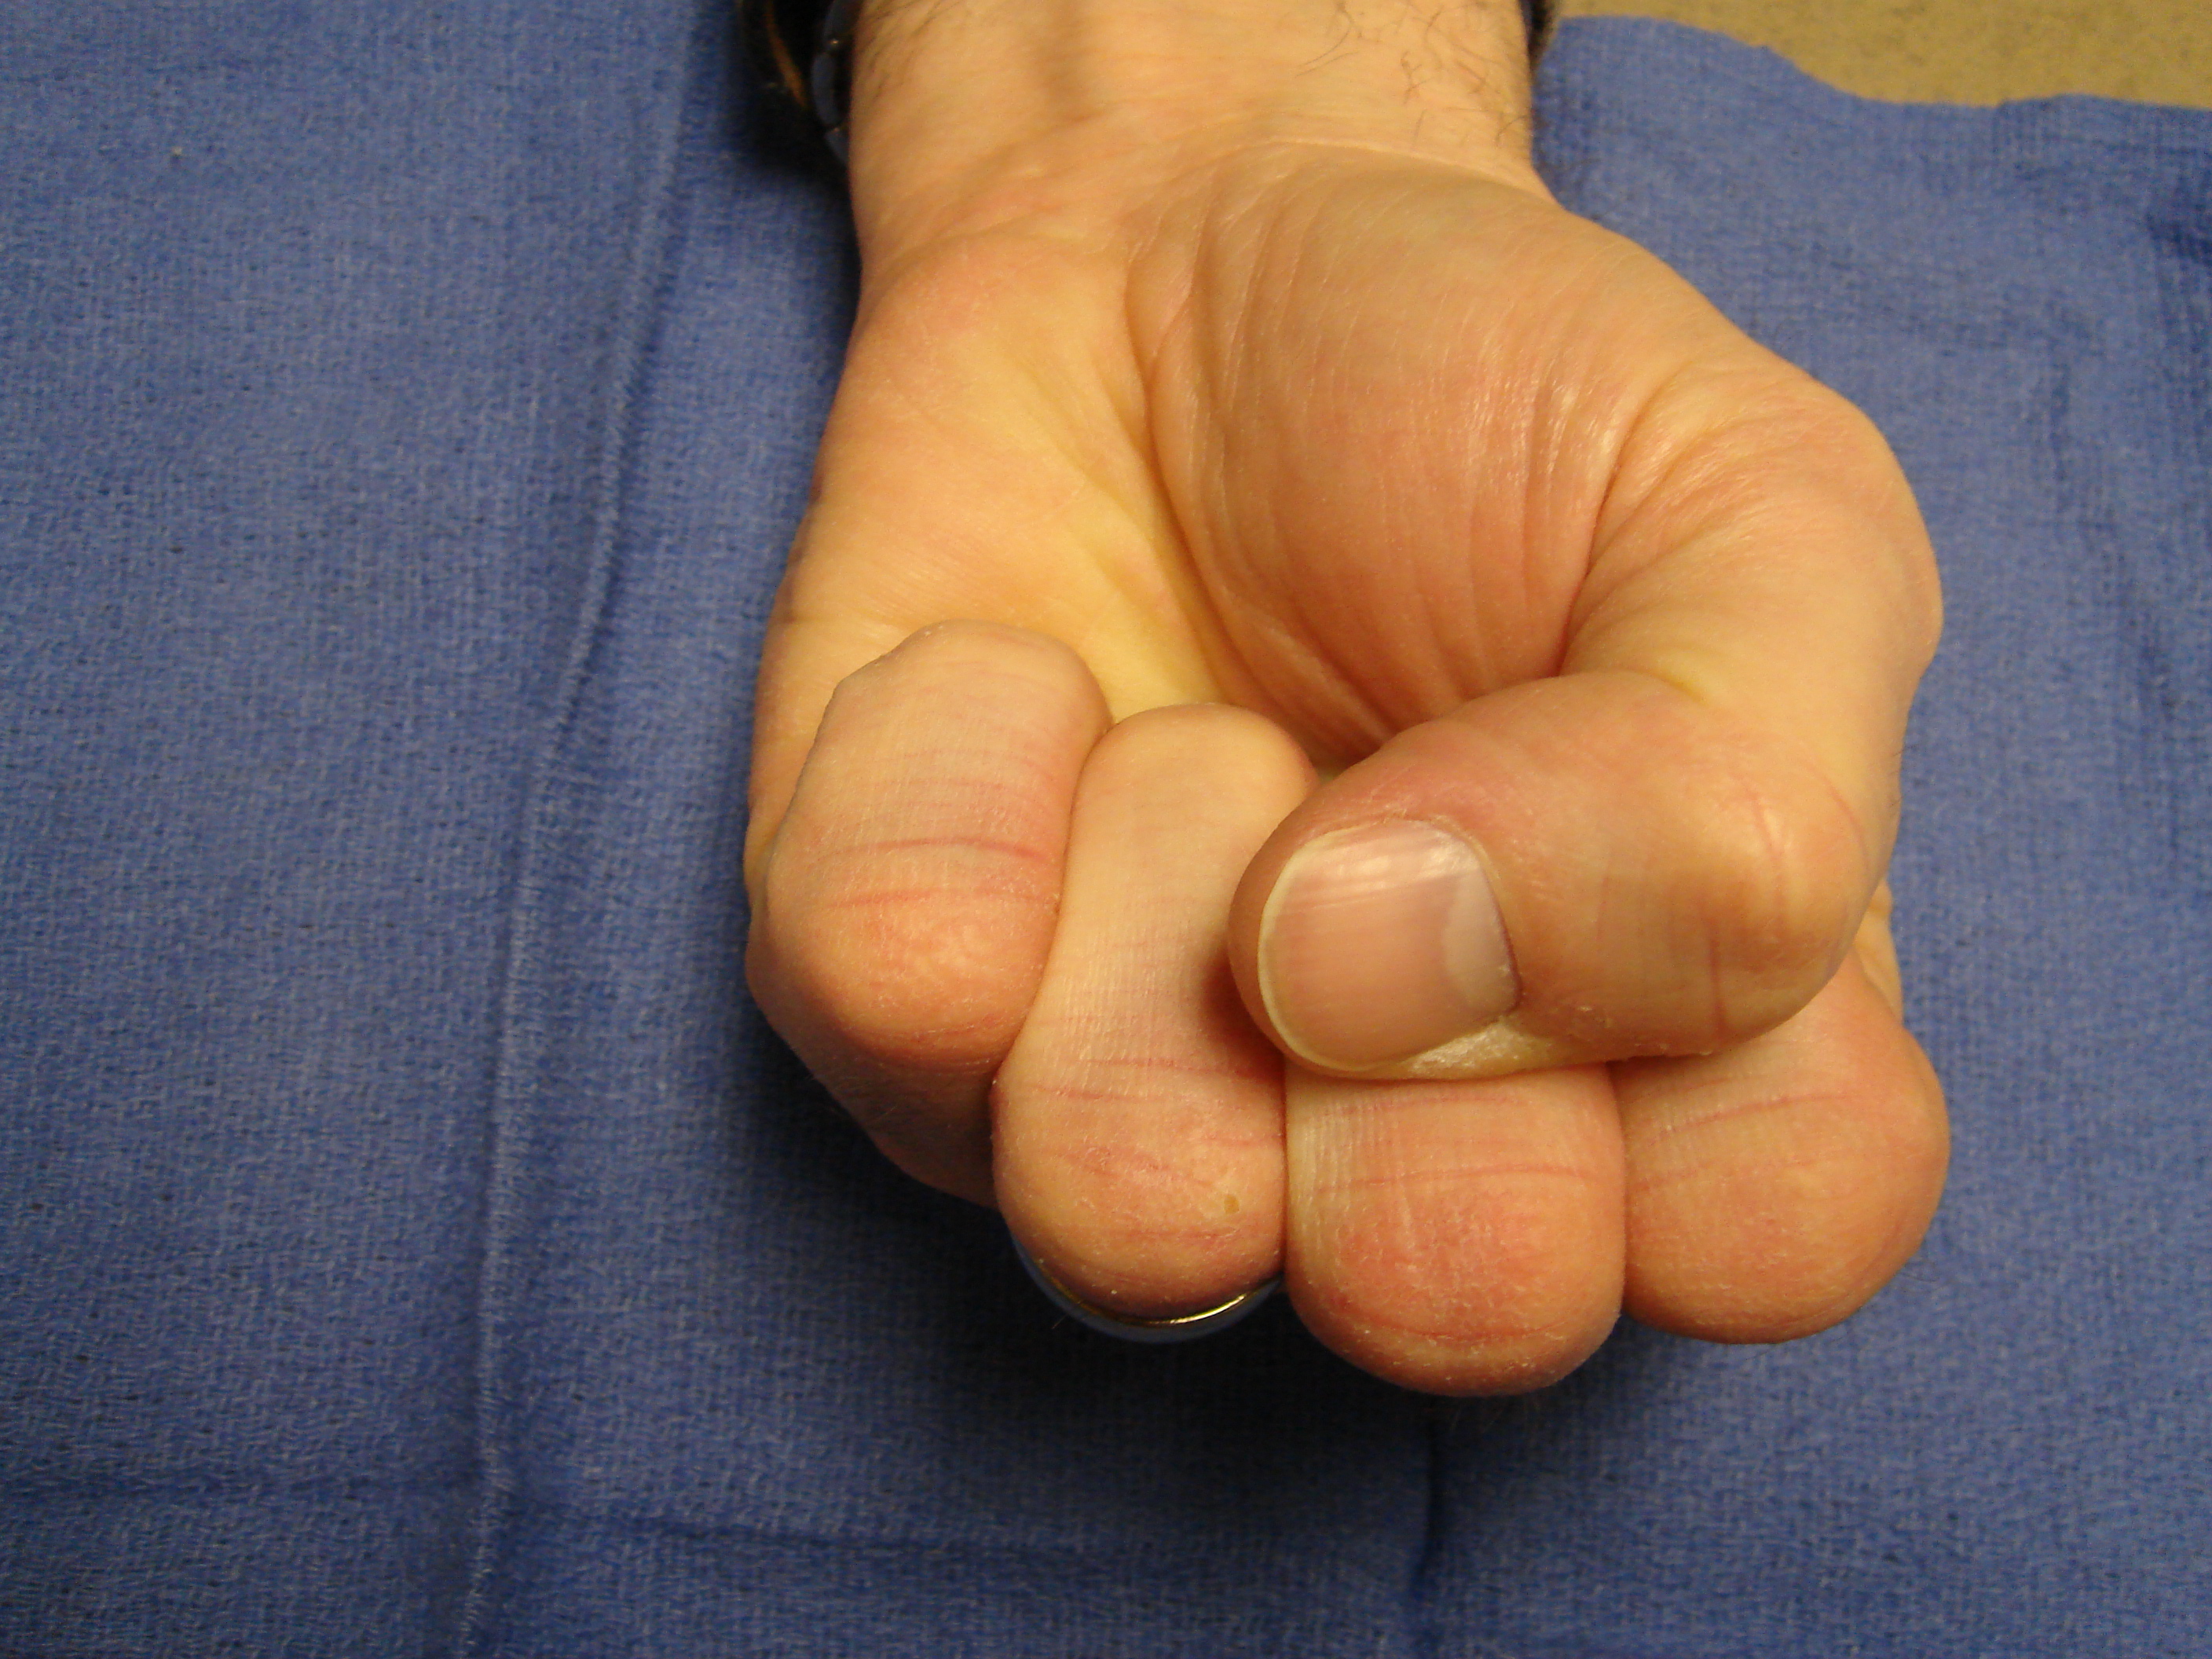 Figure 3e: Six months after collagenase treatment the patient maintains full active motion. A proximal phalangeal fascial nodule is seen slightly enlarged from pre-treatment; but there is yet no new contracture.